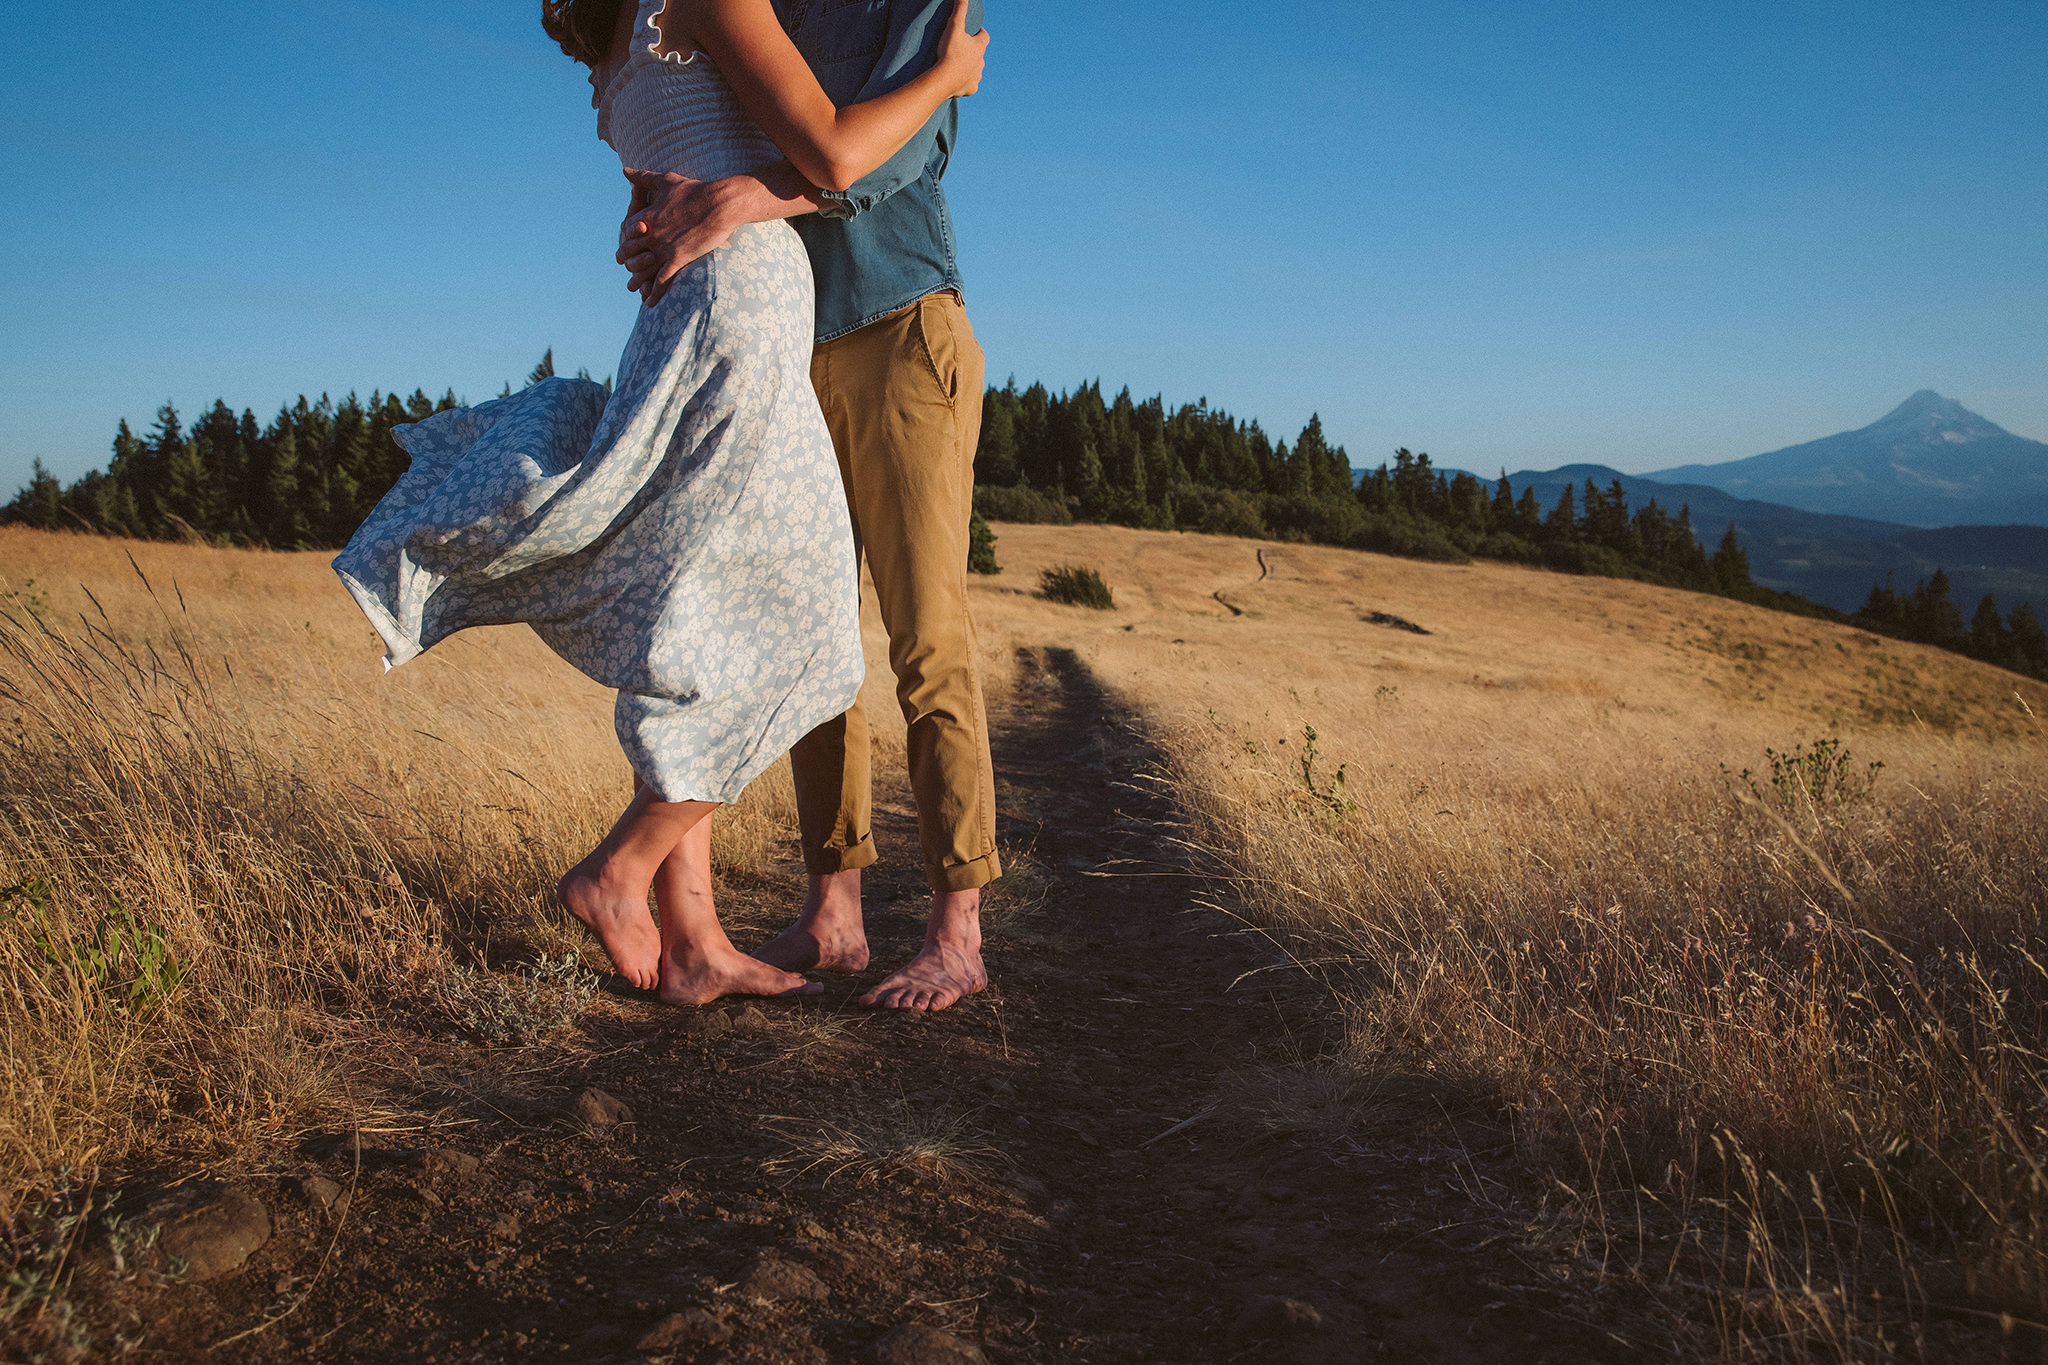 A windy summer engagement photo with Mount Hood in the background